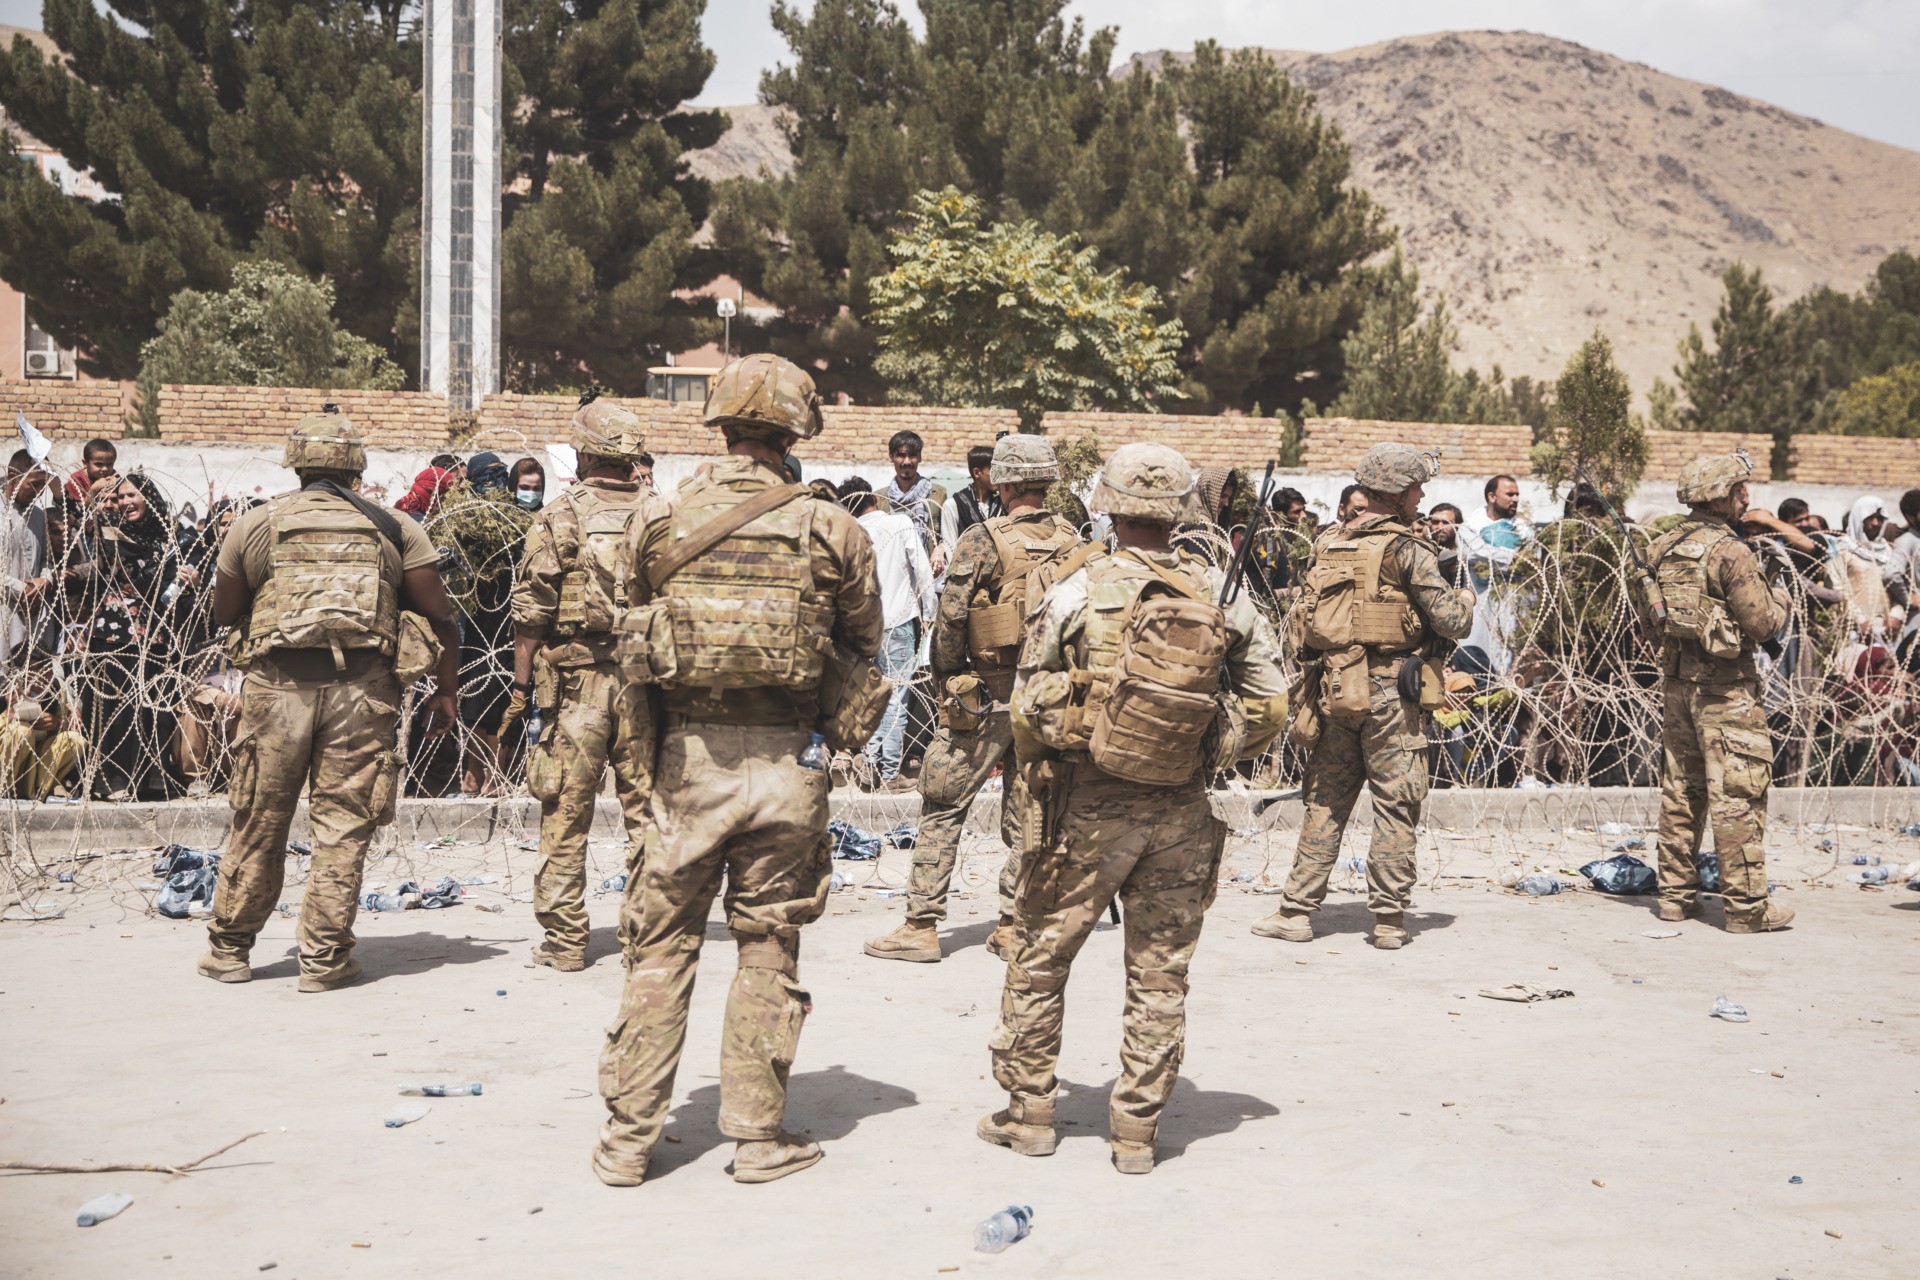 HAMID KARZAI INTERNATIONAL AIRPORT, AFGHANISTAN - AUGUST 19: This handout image shows U.S. Soldiers and Marines assist with security at an Evacuation Control Checkpoint during an evacuation at Hamid Karzai International Airport, August 19, 2021 in Kabul, Afghanistan. U.S. service members are assisting the Department of State with a non-combatant evacuation operation (NEO) in Afghanistan. (Photo by Staff Sgt. Victor Mancilla / U.S. Marine Corps via Getty Images)